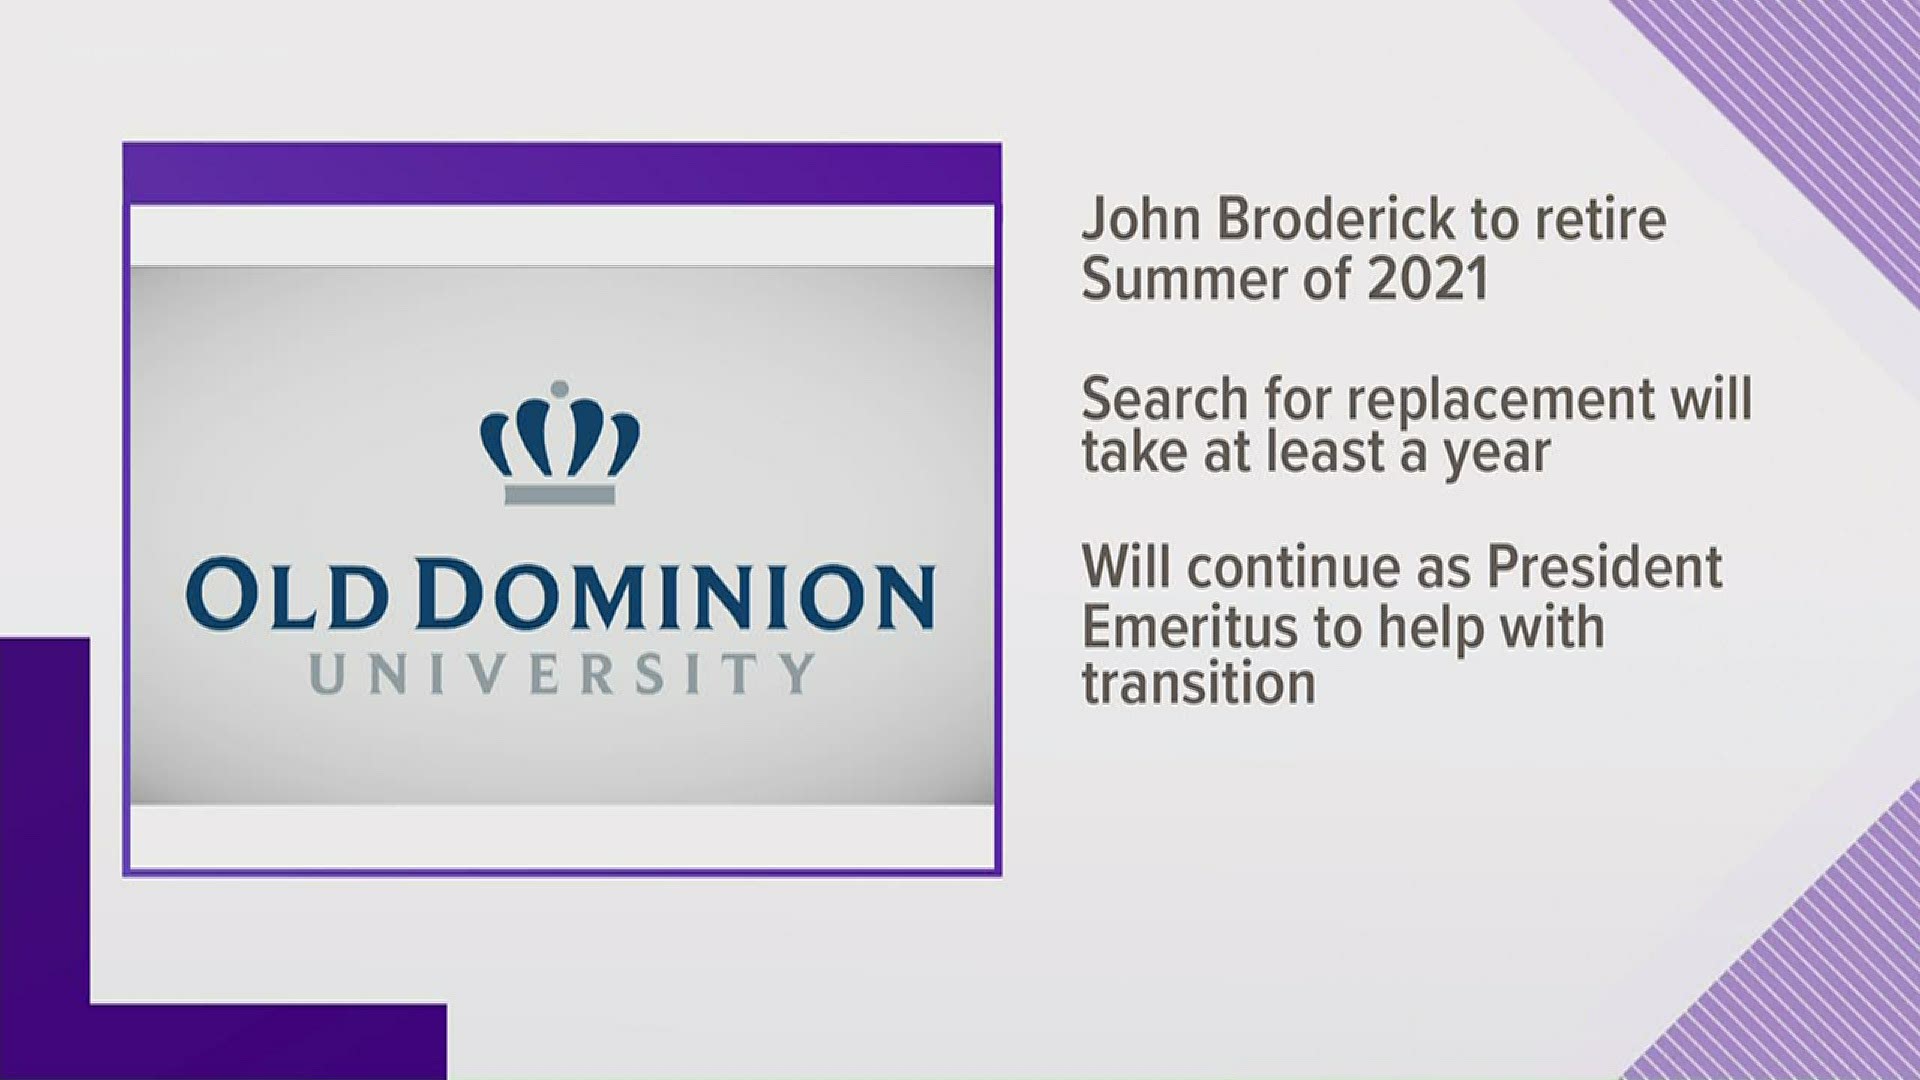 ODU President John Broderick will be retiring from his position in 2021. However, he still plans to take an active part in his successor's transition.